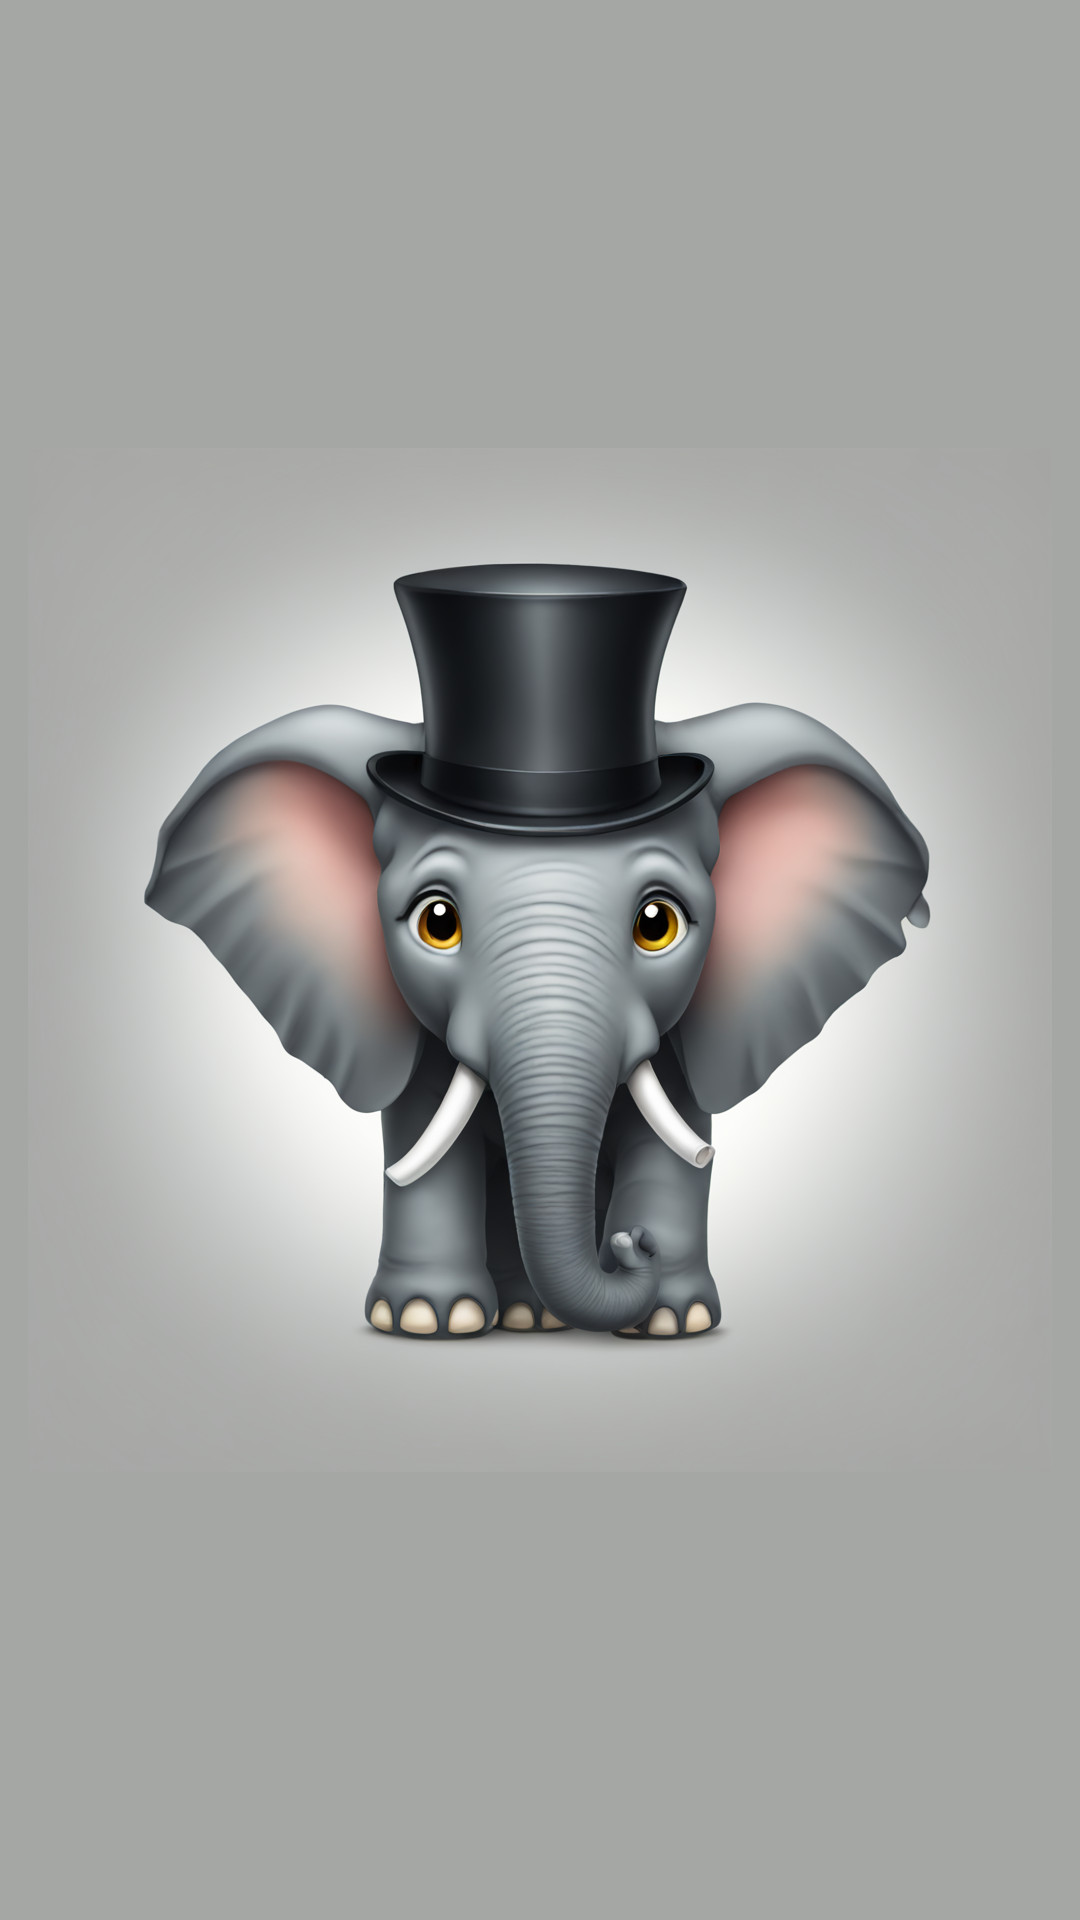 Elephant with a monocle